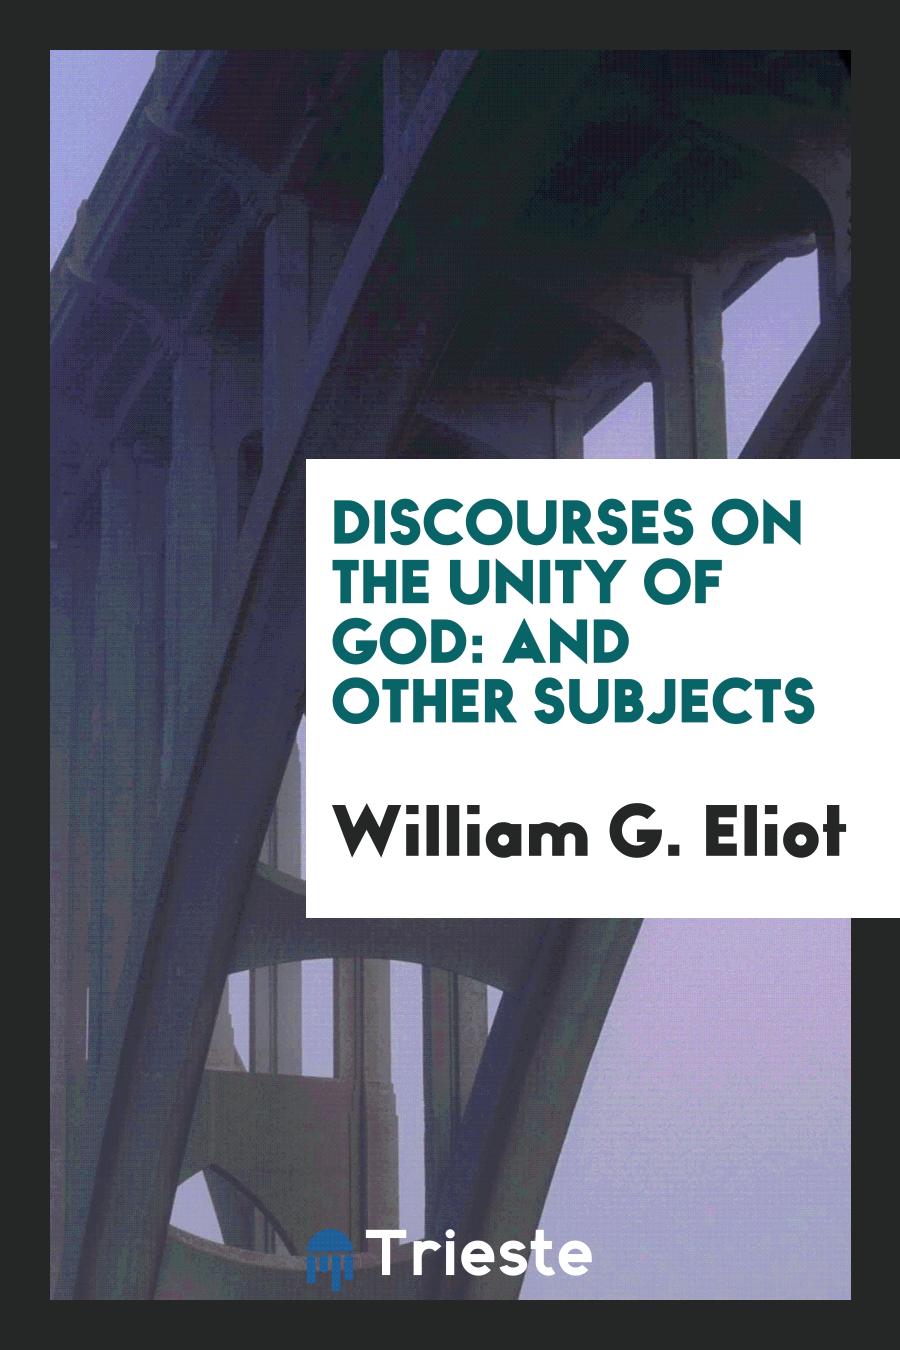 Discourses on the Unity of God: And Other Subjects